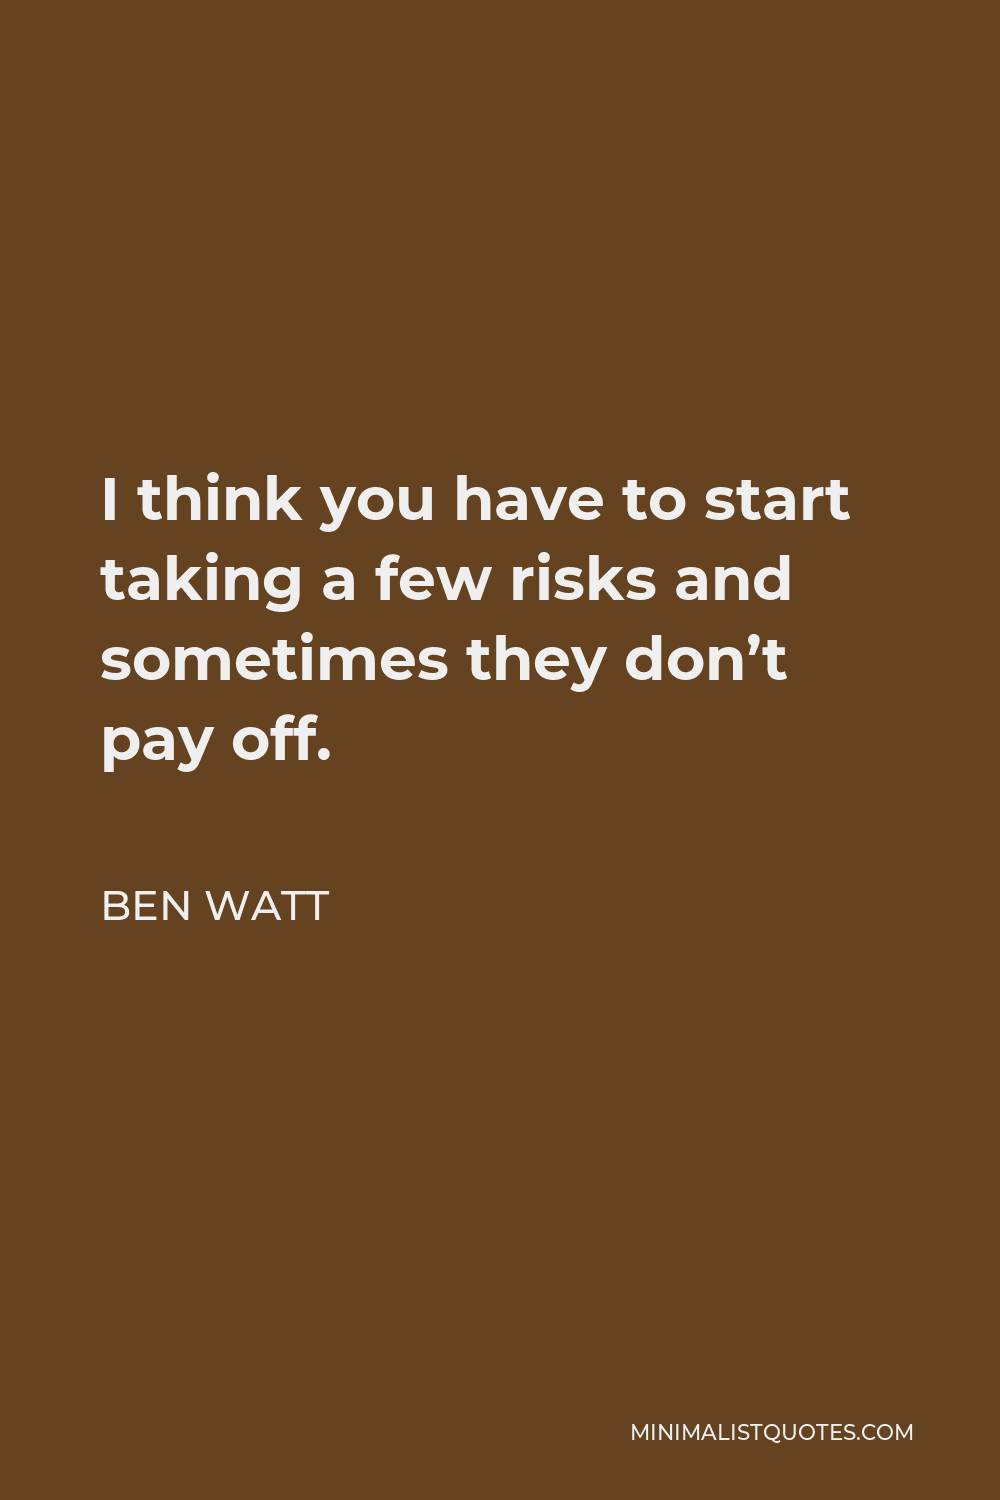 Ben Watt Quote - I think you have to start taking a few risks and sometimes they don’t pay off.